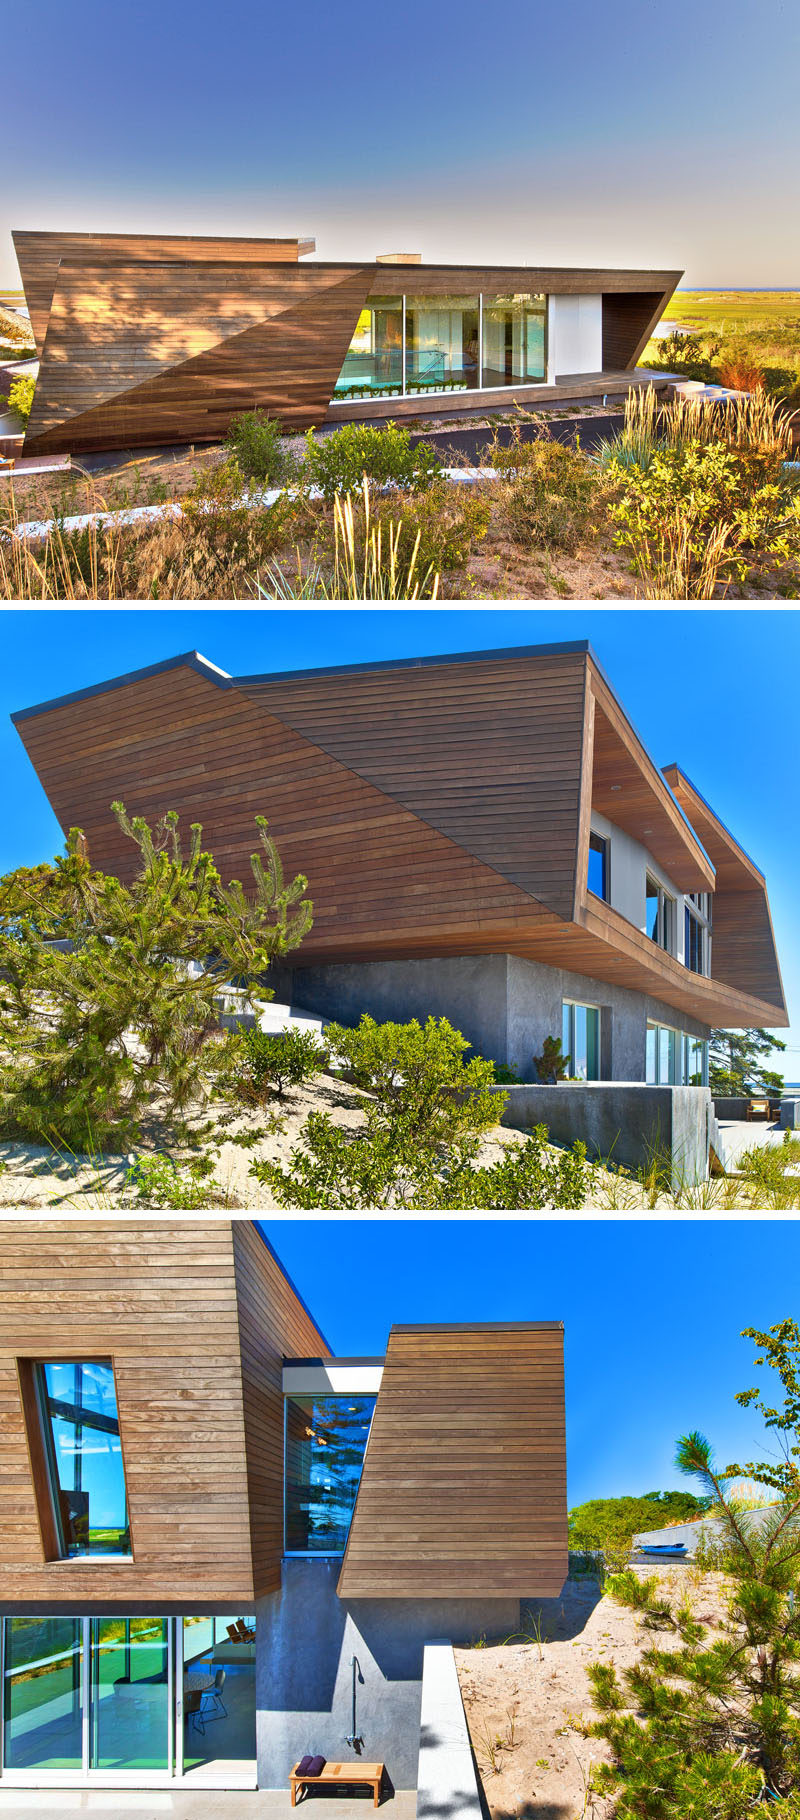 This two-storey wood-clad beach house was designed to fit within the city's 23 ft. height limit for residential houses, and by doing so, the home snugly fits into the sloped site.